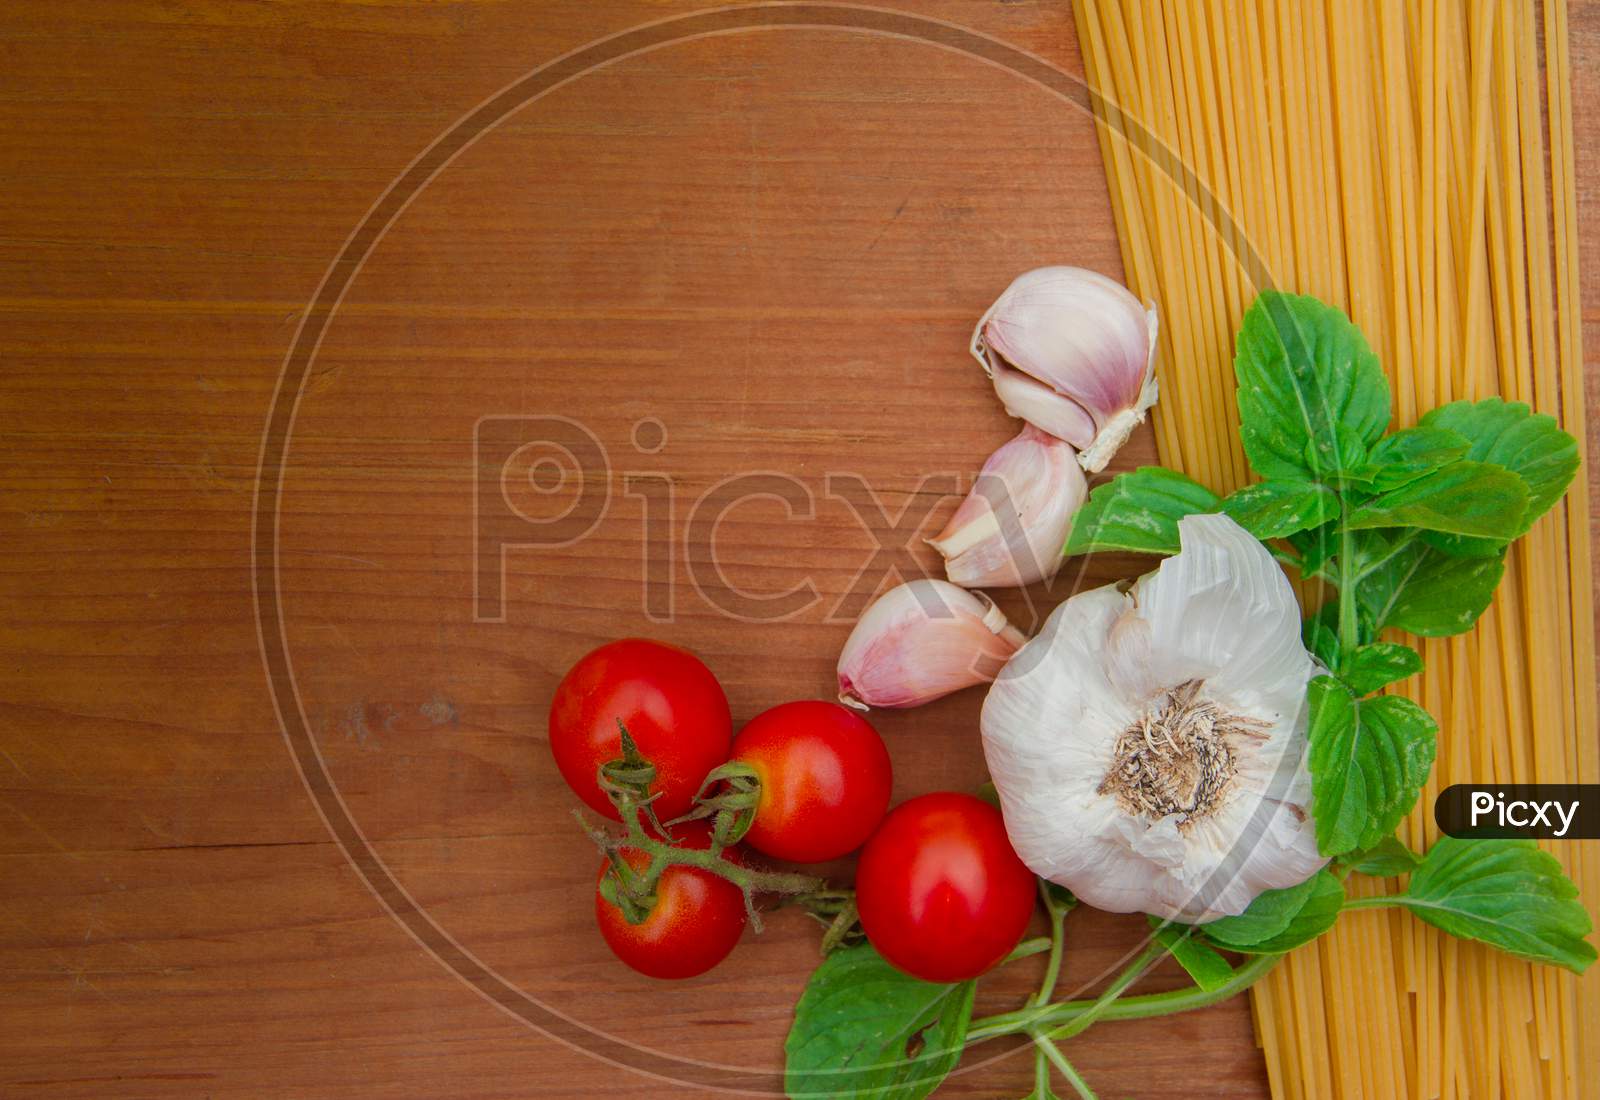 Background Ingredients Kitchen Top View With Noodles Eggs Tomatoes And Fresh Herbs